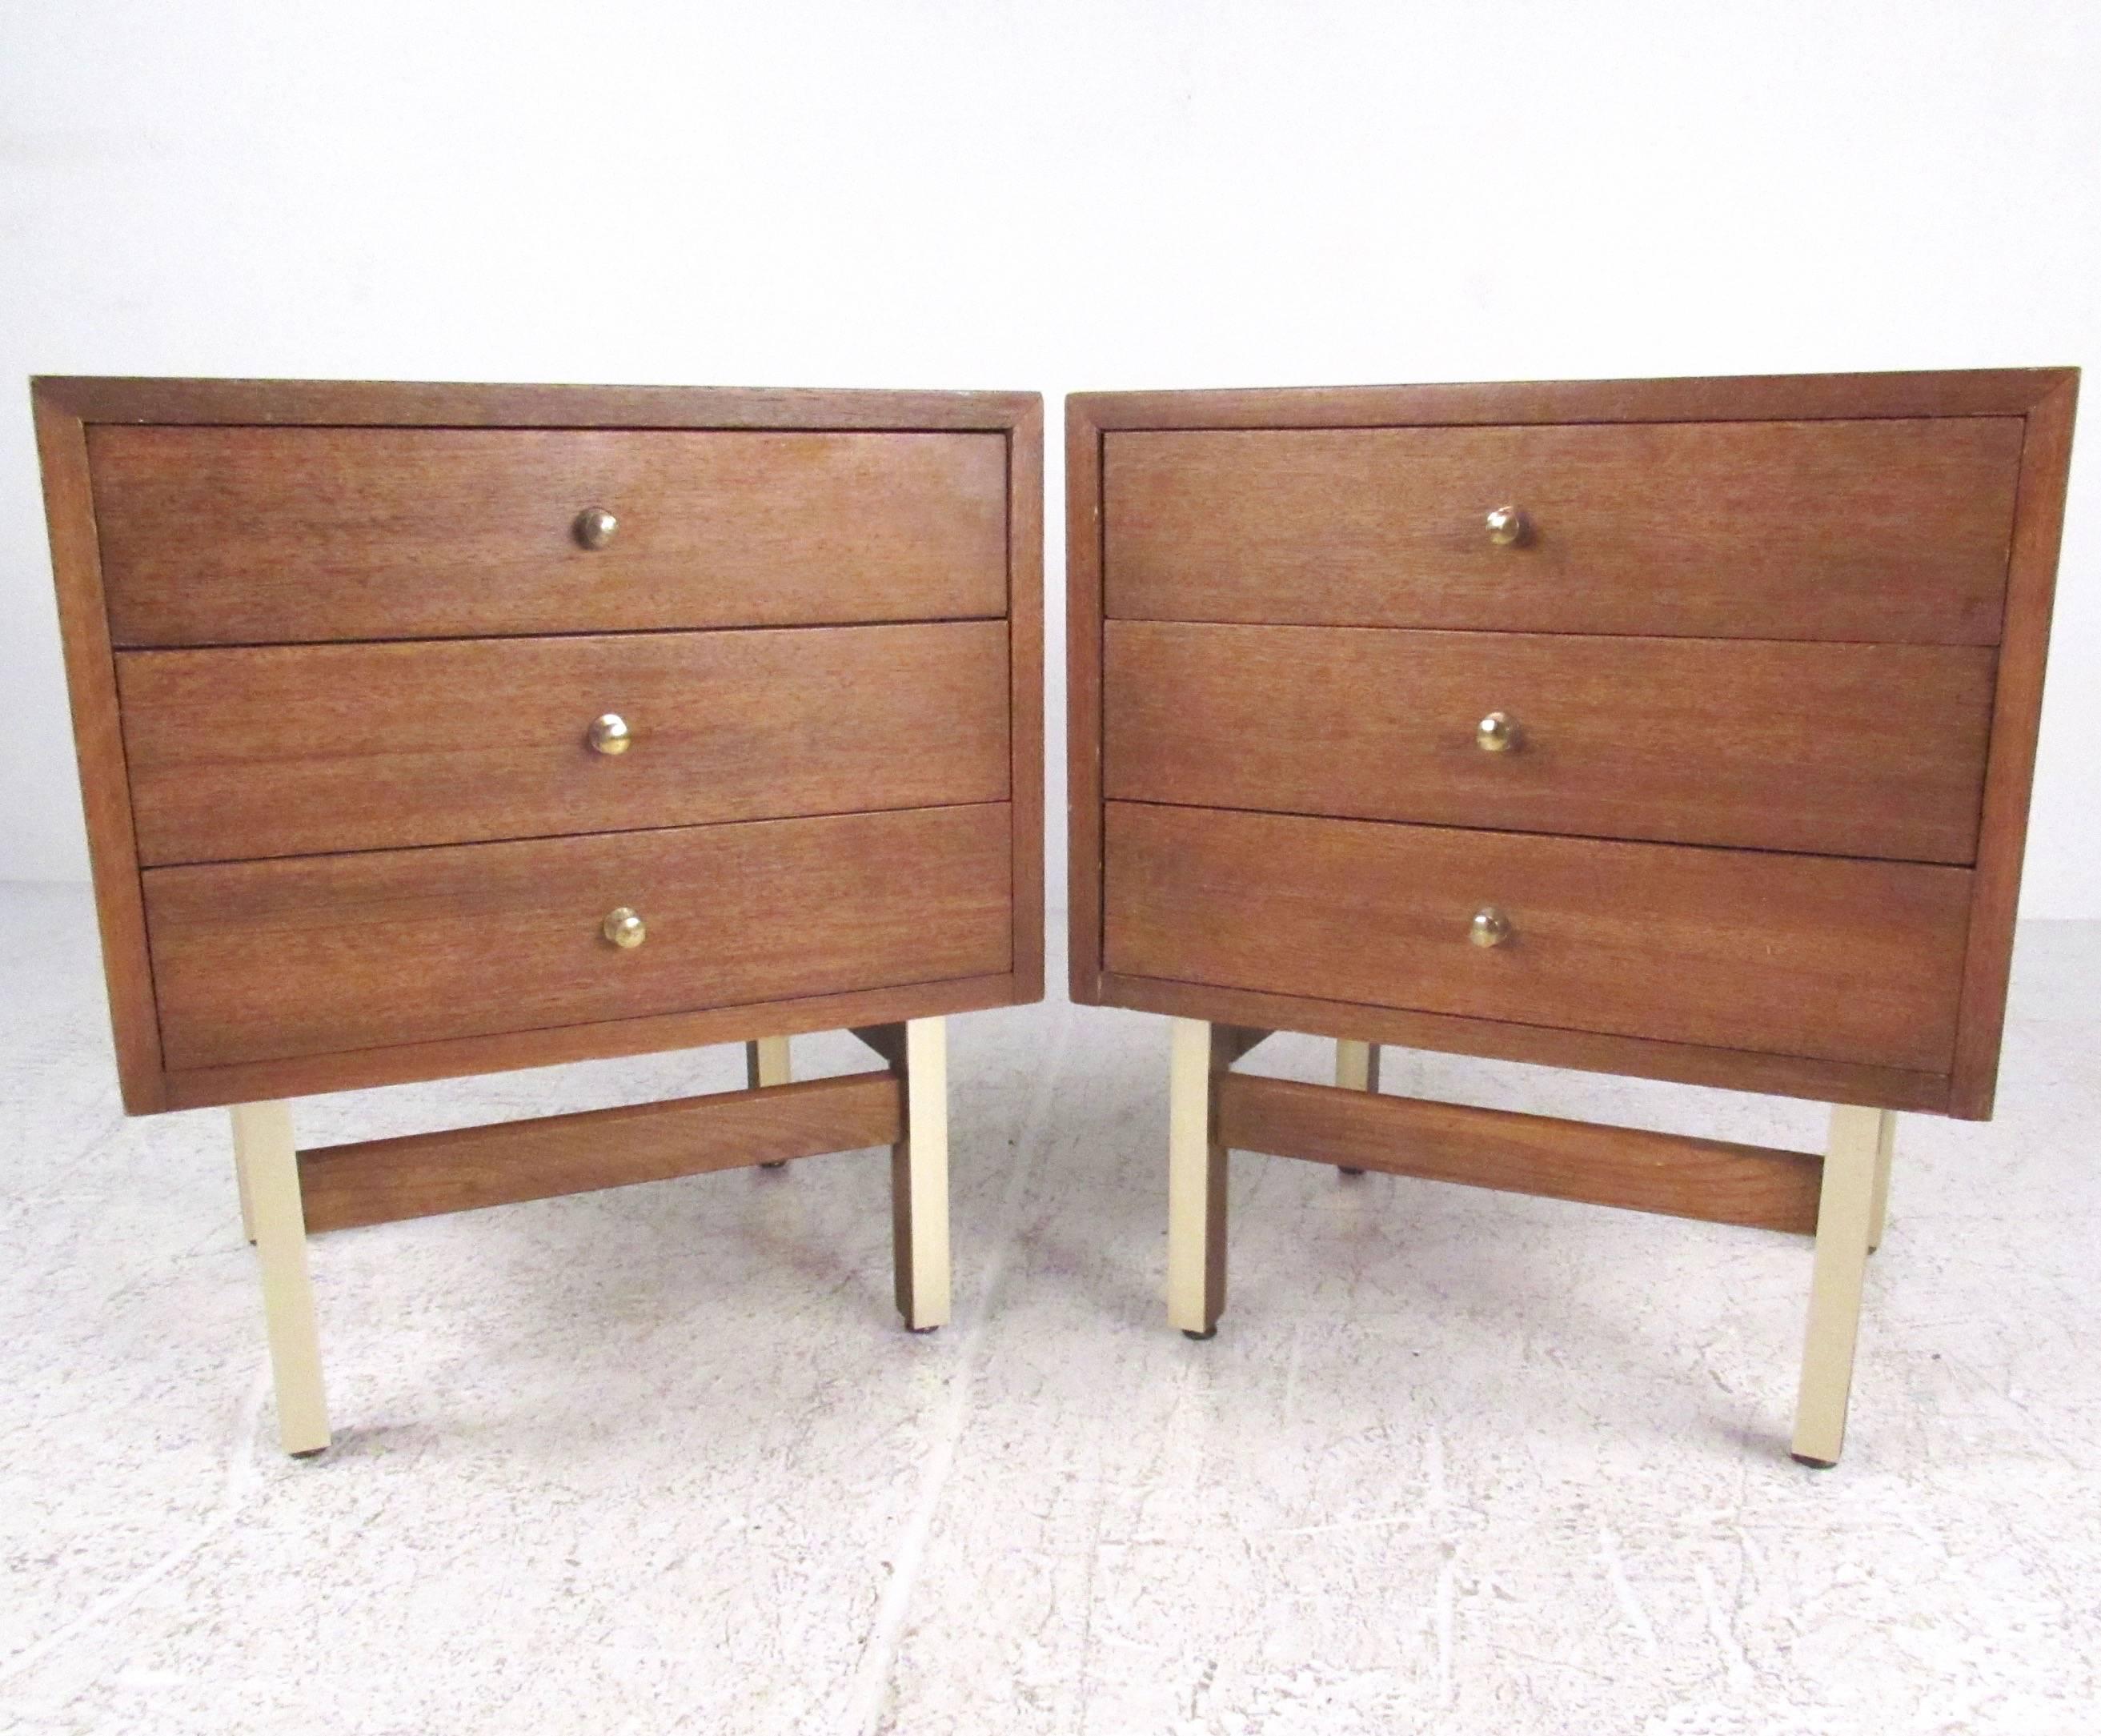 These stylish pair of Mid-Century bedside table’s features spacious three-drawer storage with dovetails construction, brass handles and unique aluminium trims. The vintage natural finish adds a wonderful vintage accent to any interior, from bedroom